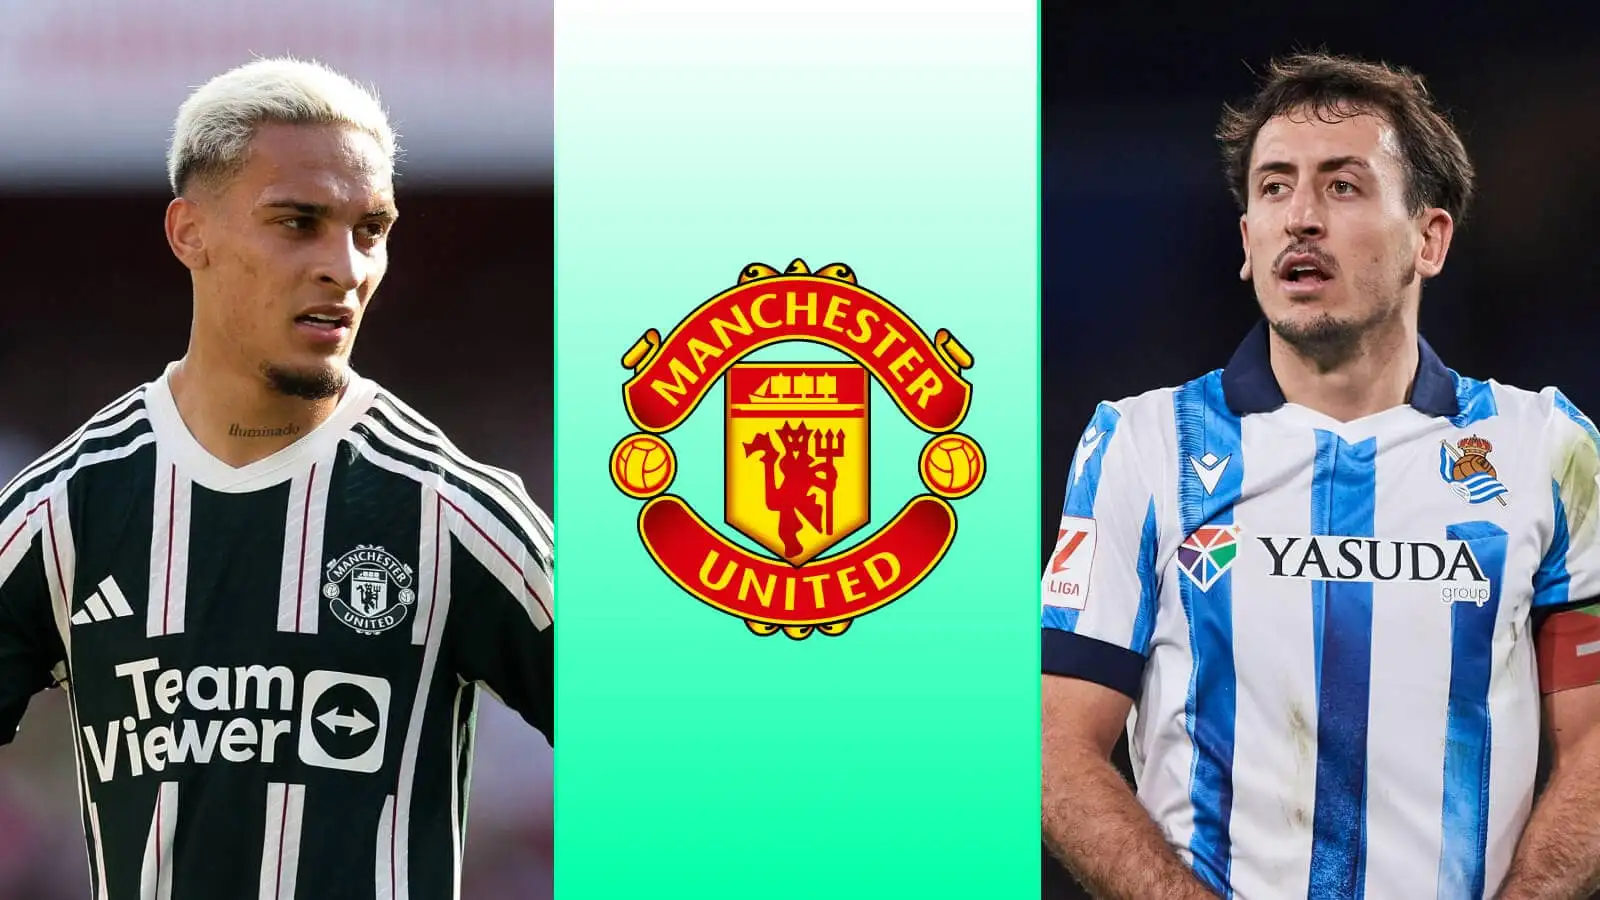 Antony could be replaced by Real Sociedad winger Mikel Oyarzabal at Manchester United